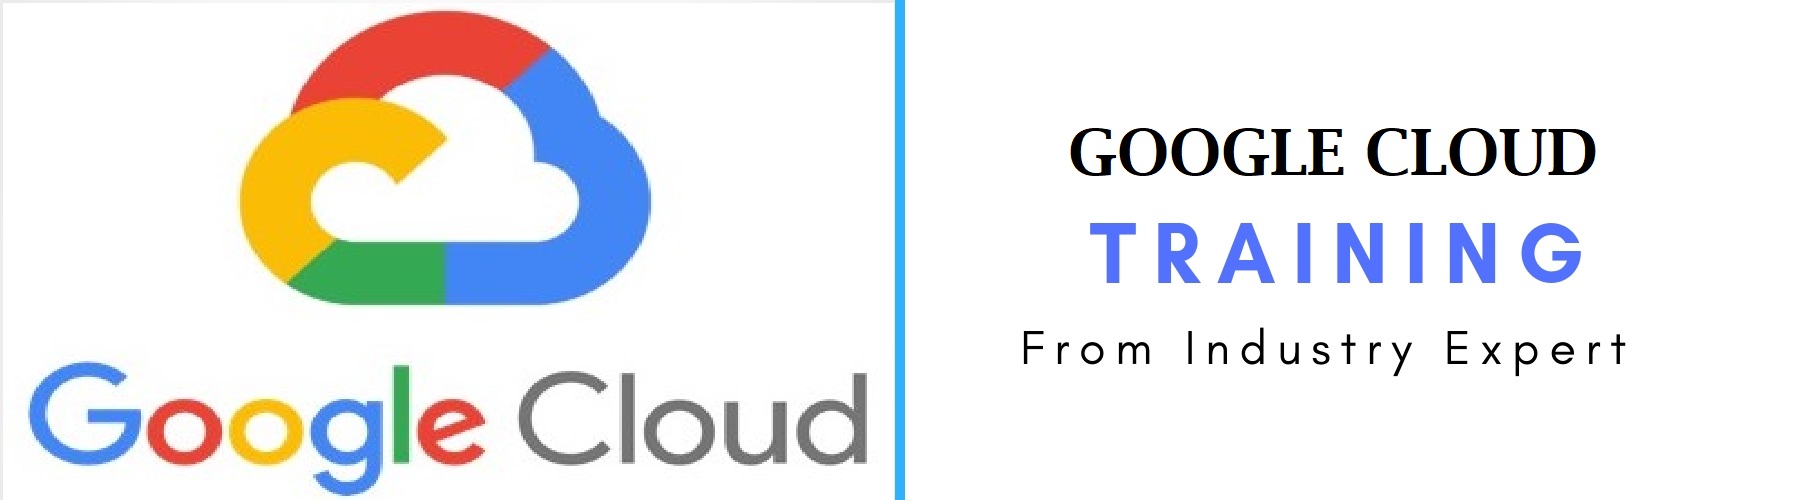 Google Cloud Training From Industry Experts